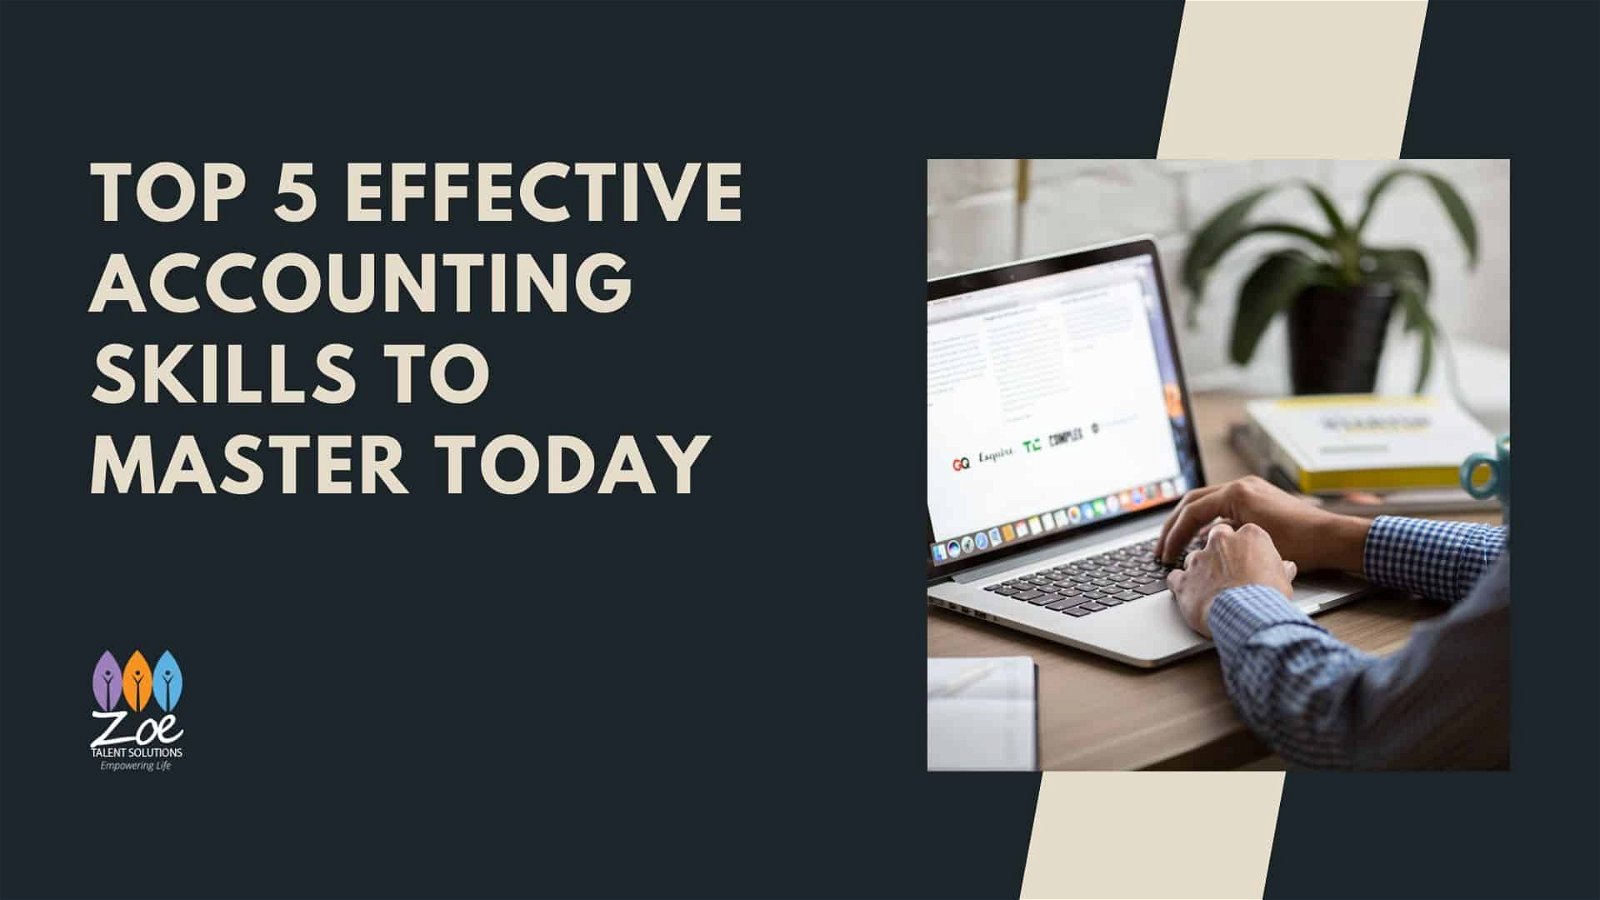 Top 5 Effective Accounting Skills to Master Today